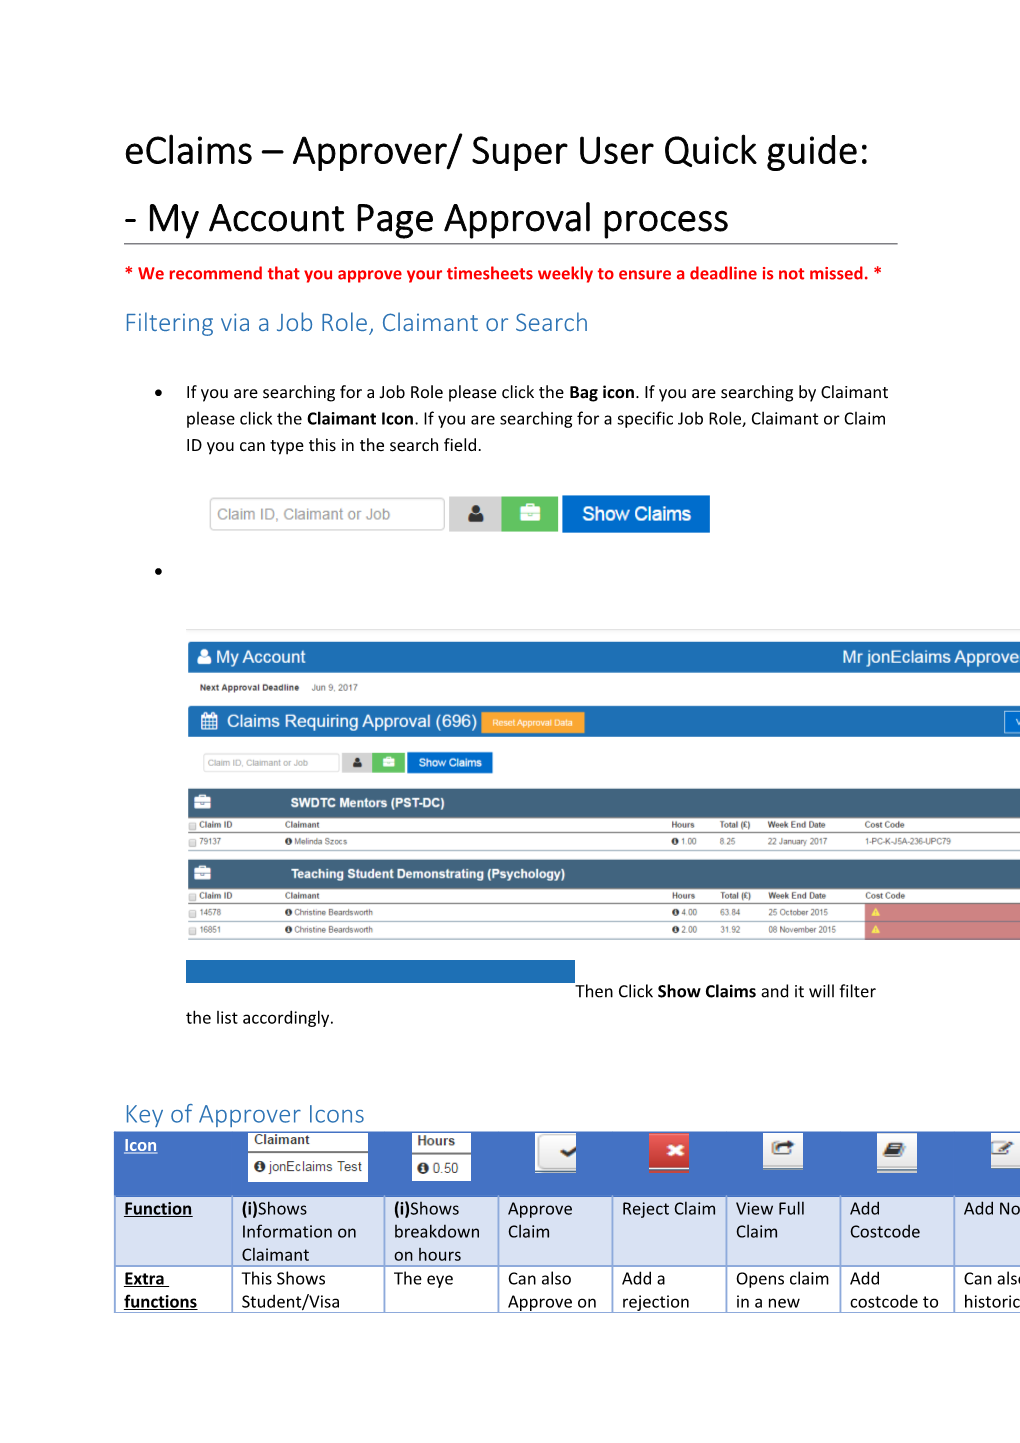 Eclaims Approver/ Super User Quick Guide